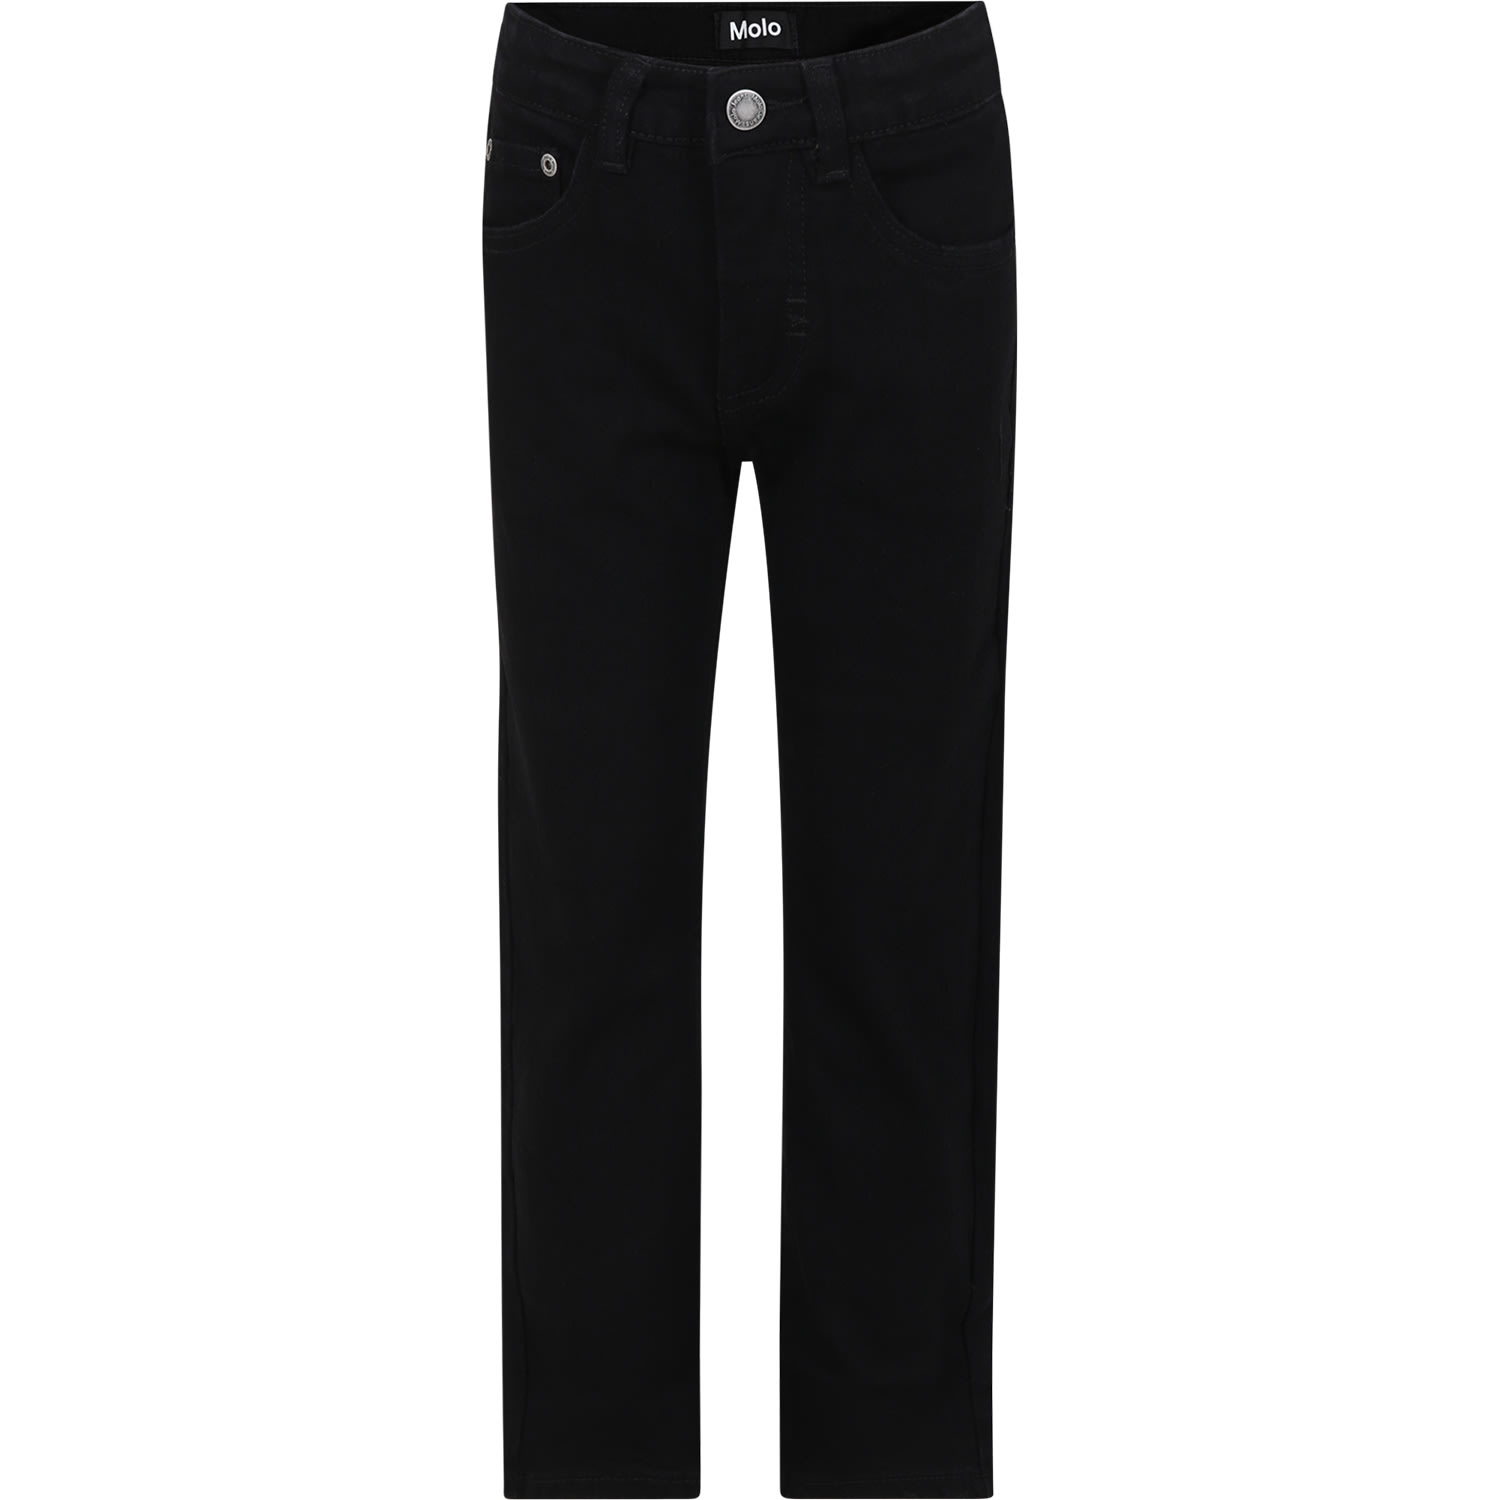 Molo Kids' Black Jeans For Boy With Logo